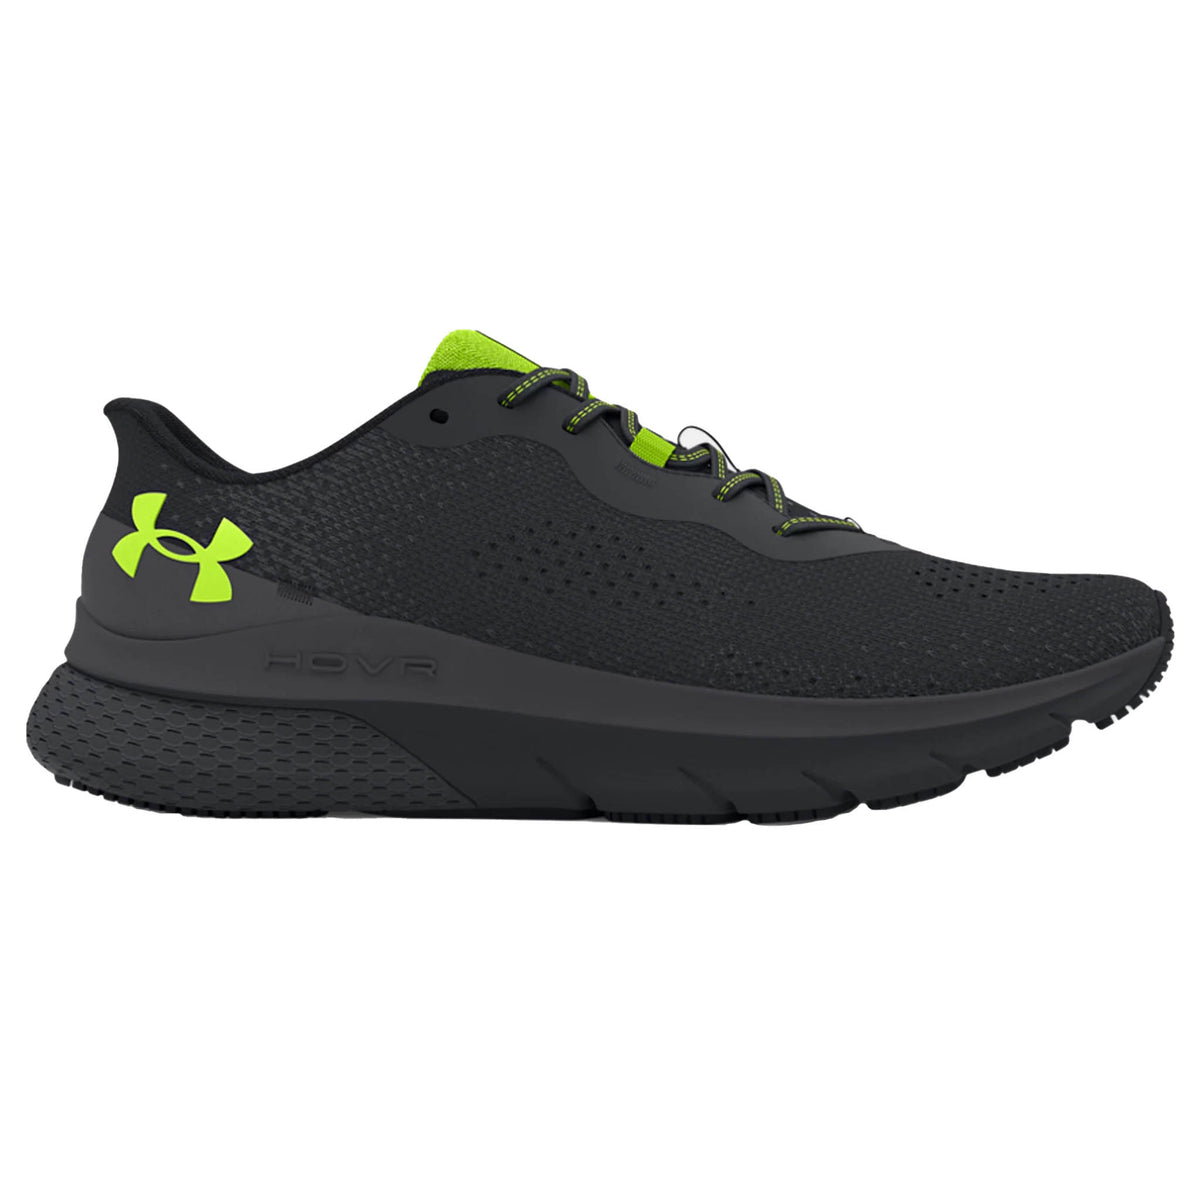 Under Armour HOVR Turbulence 2 Kids Running Shoes: Black/Yellow